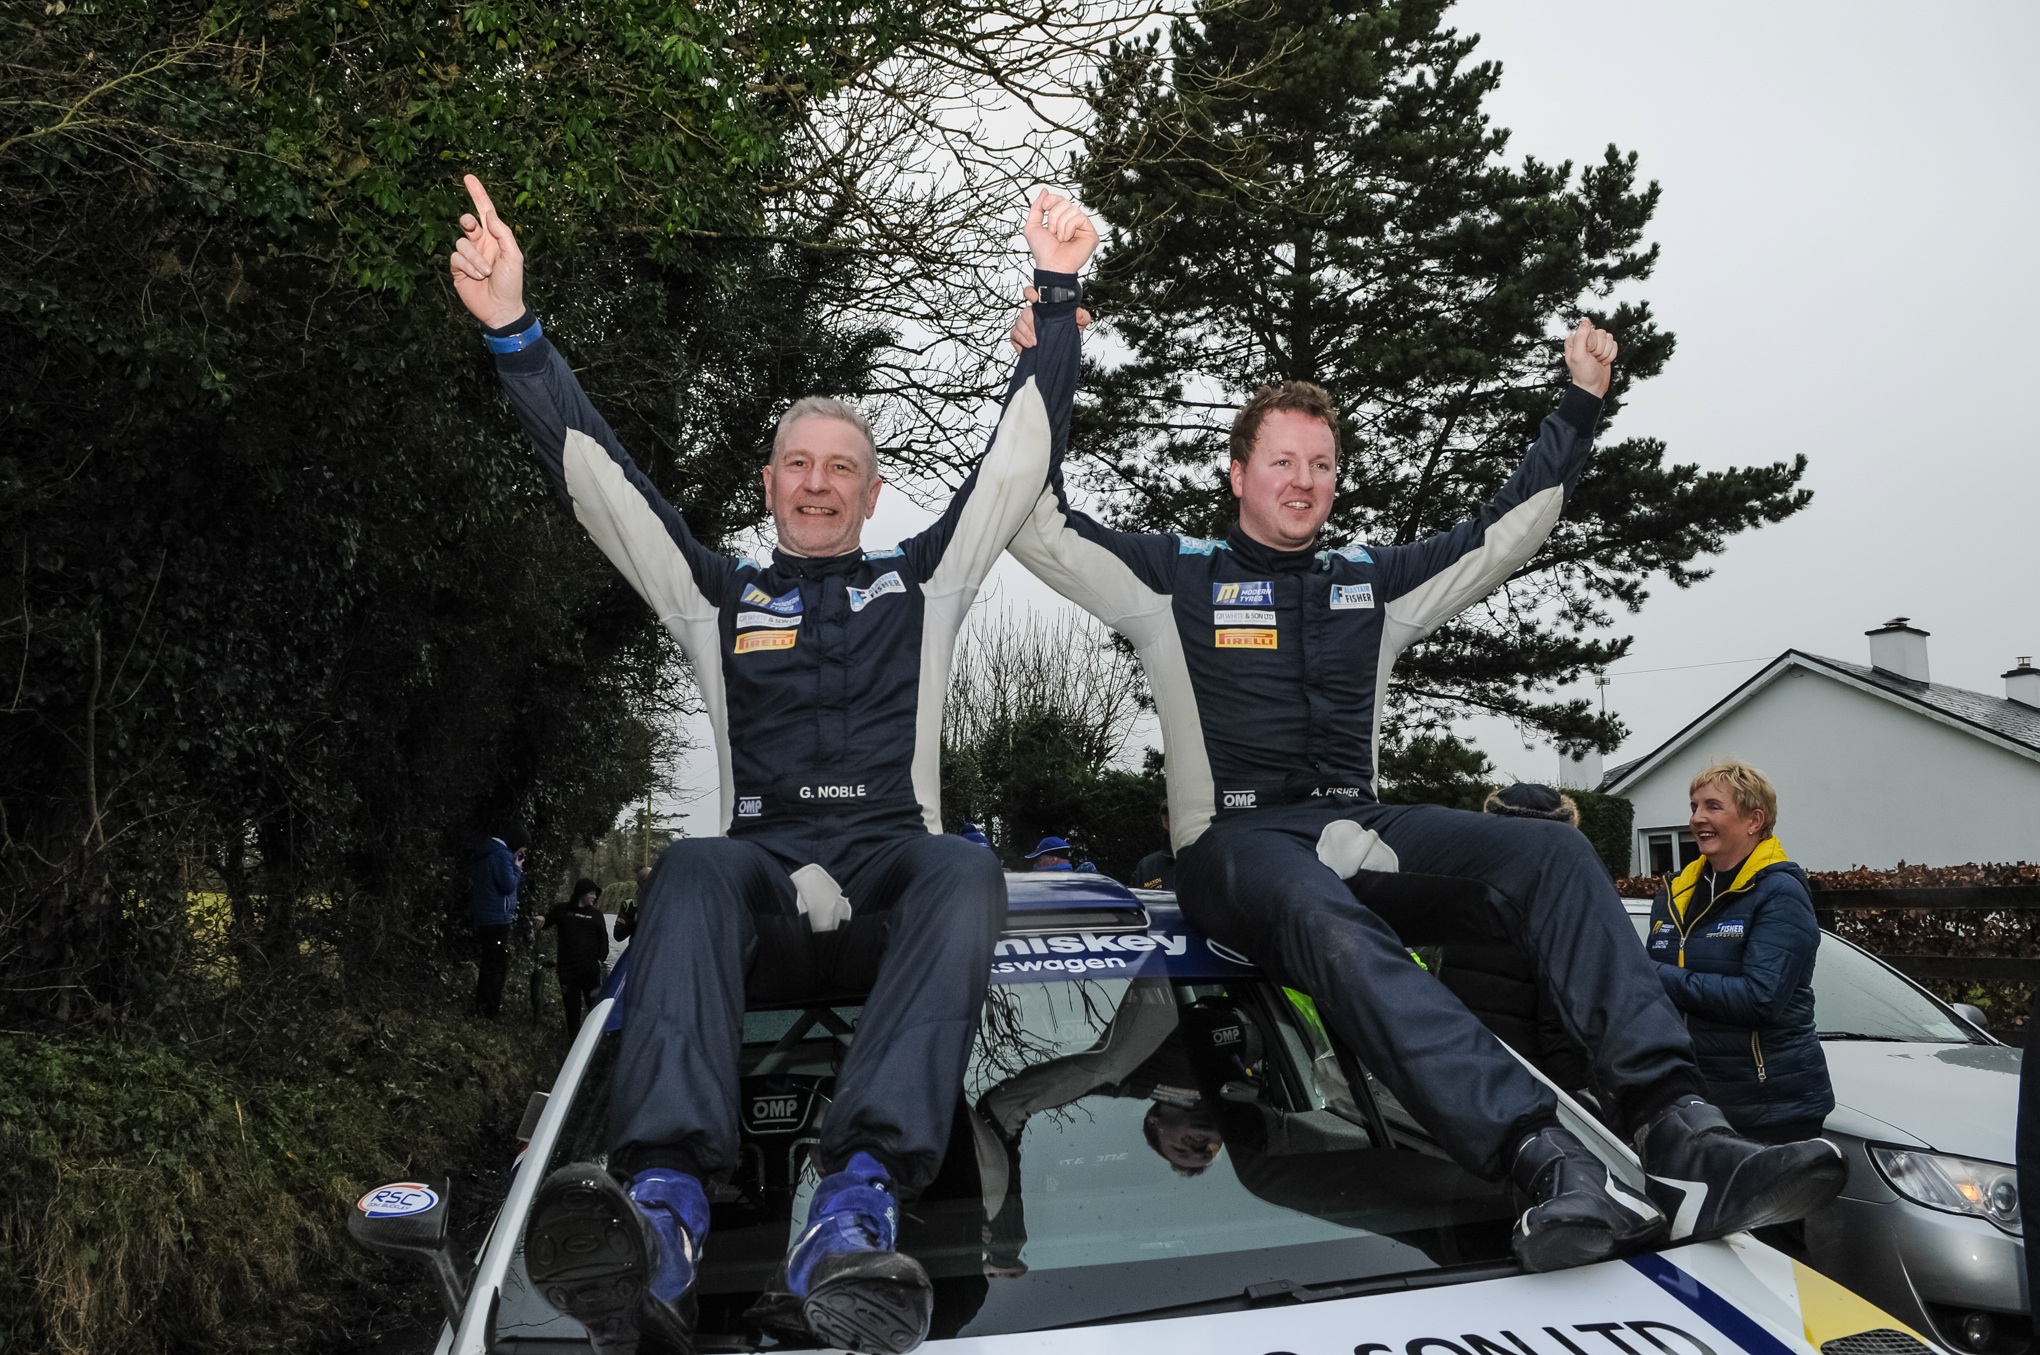 Noble’s great memories of the Circuit of Ireland